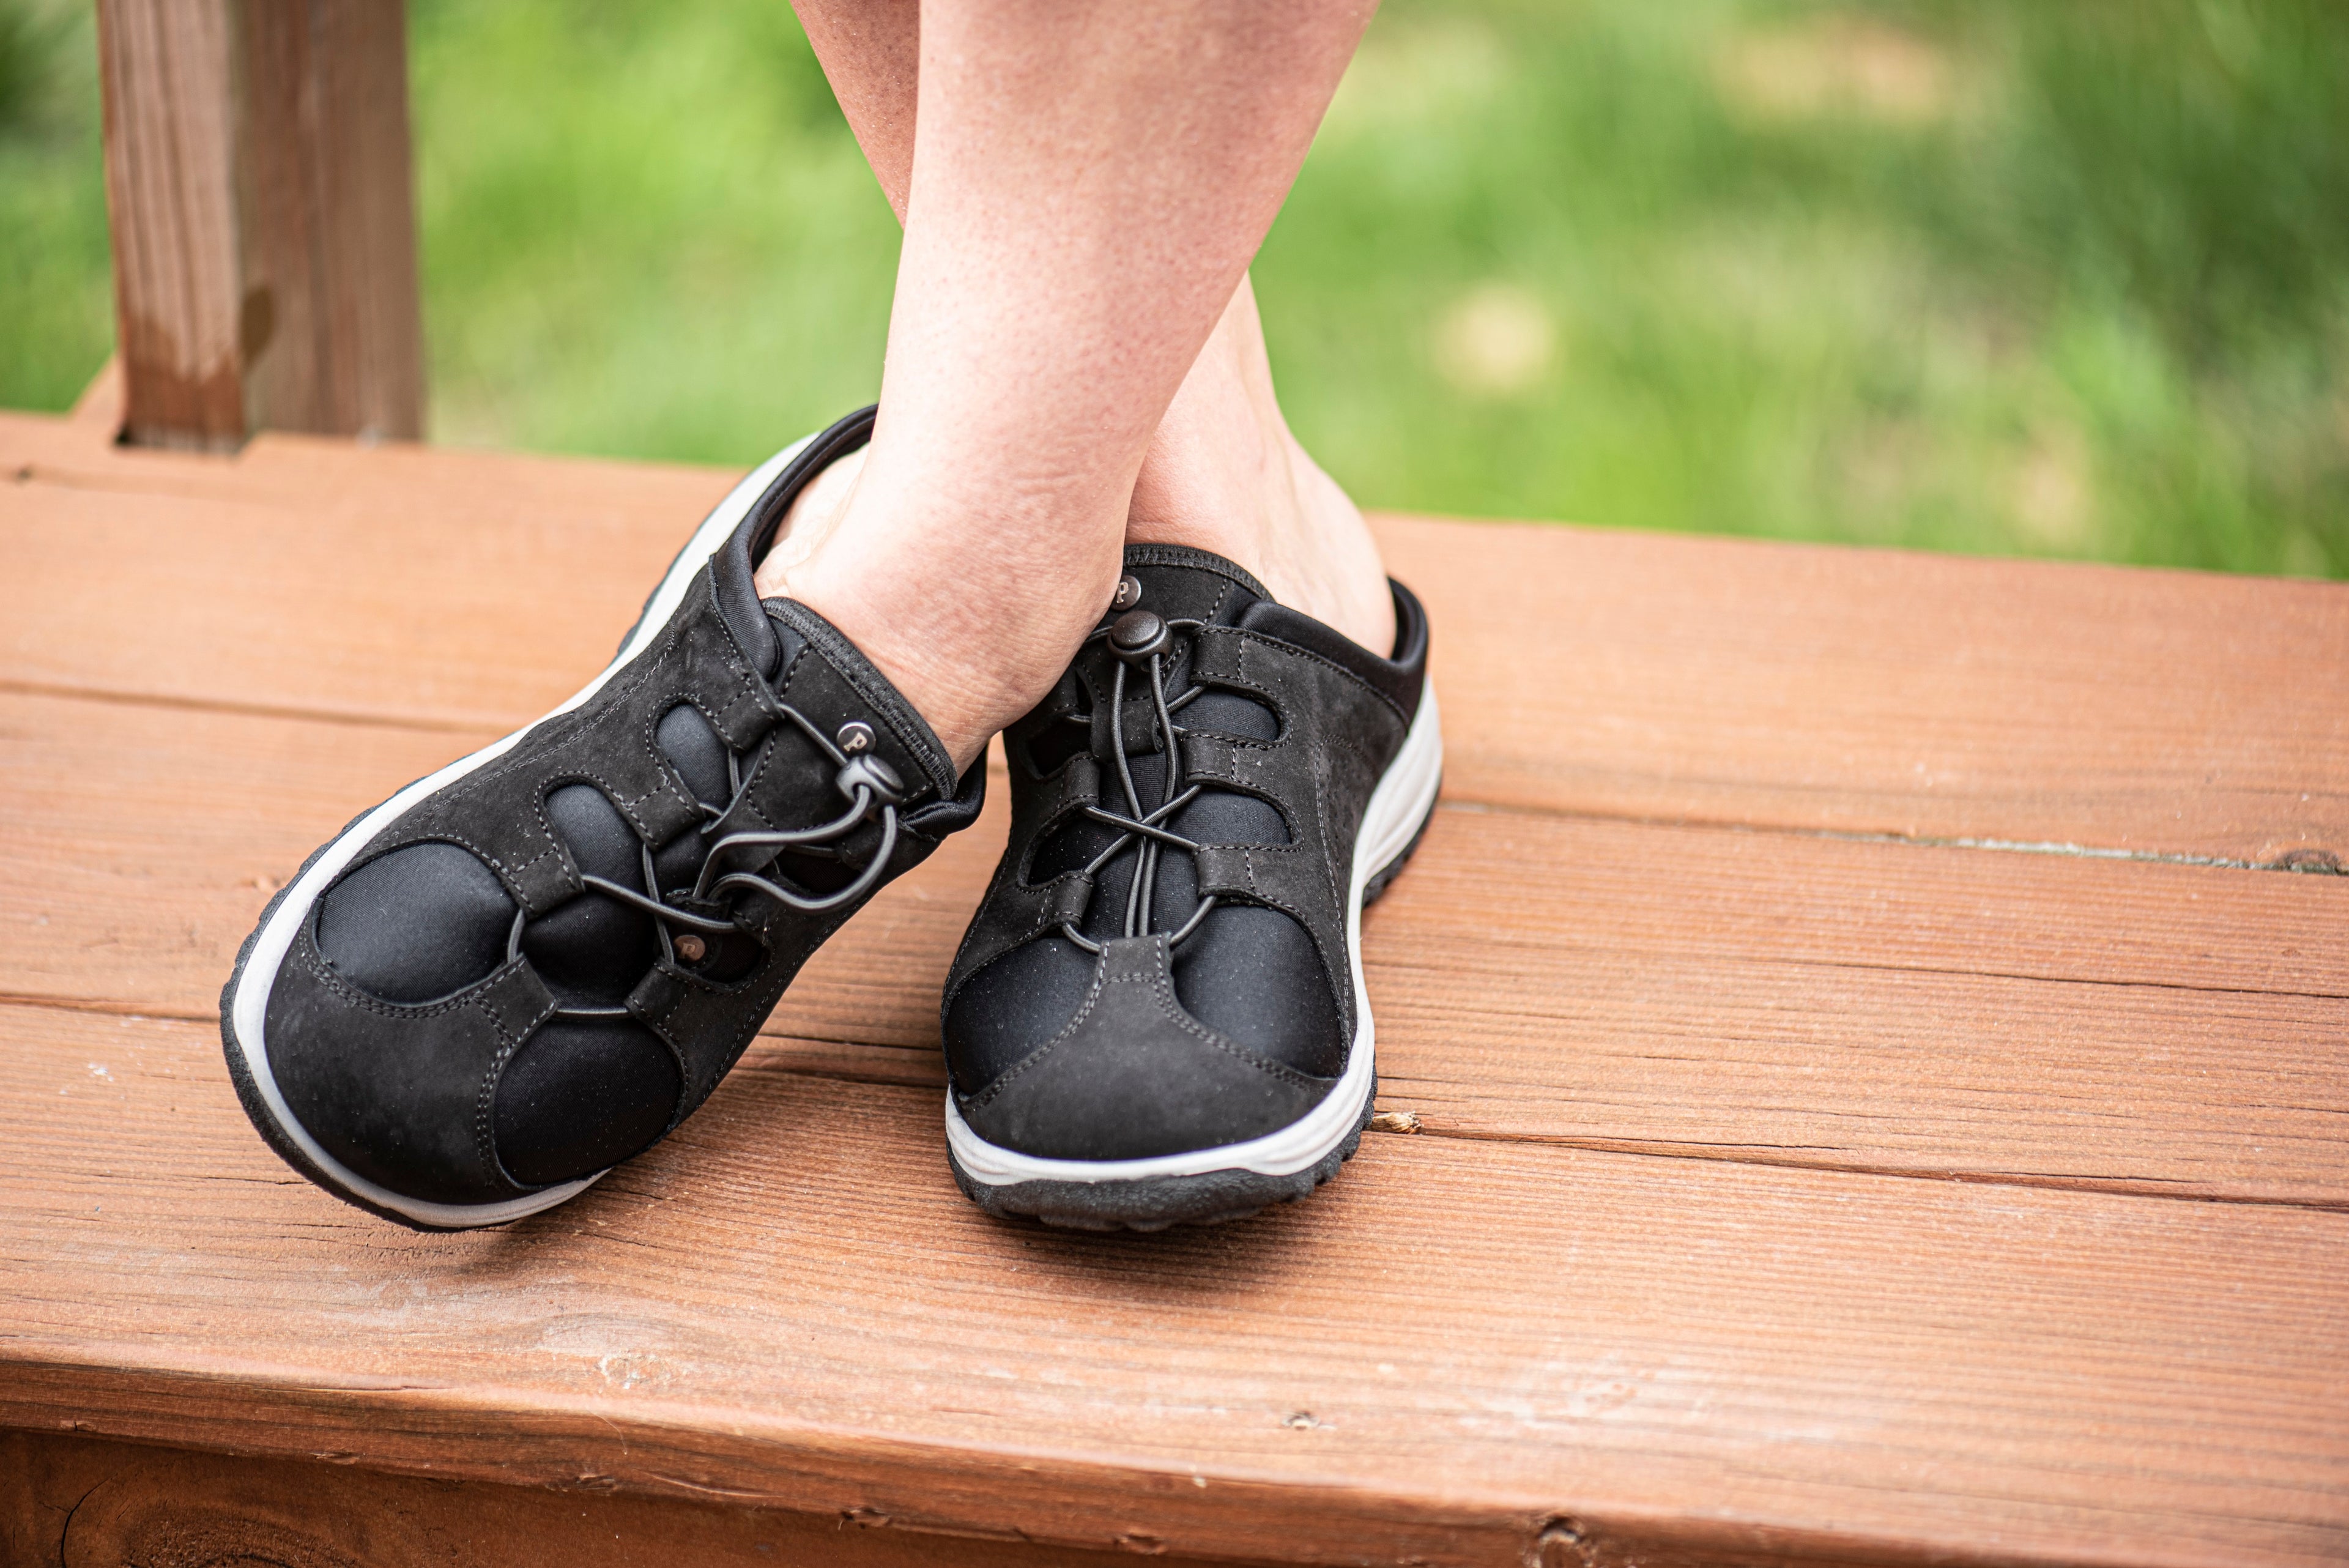 How to Find Extra-Wide Socks for Bunions, Wide Feet, and Swollen